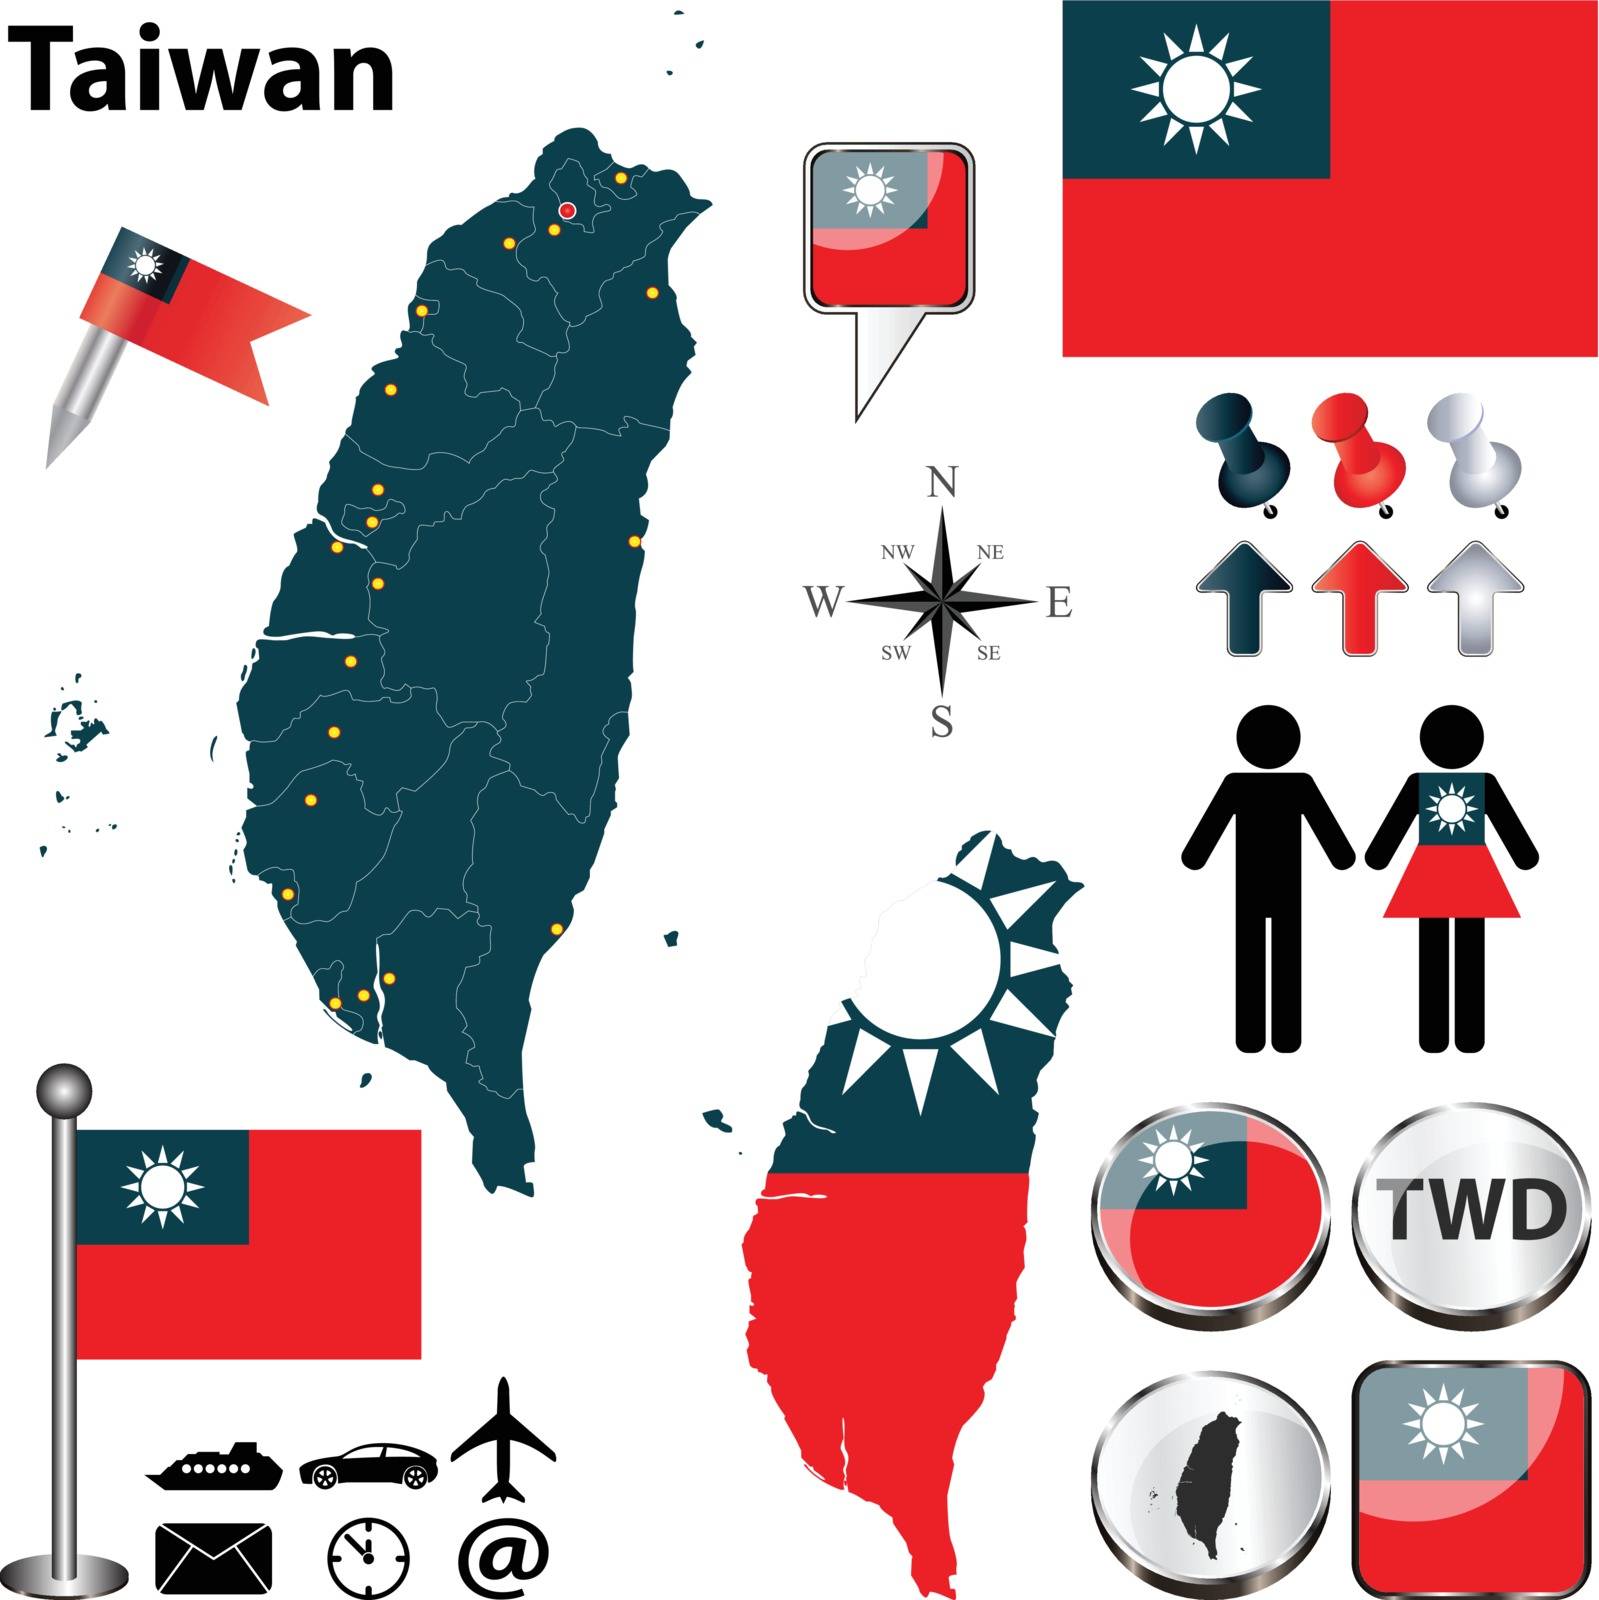 Map of Taiwan by sateda